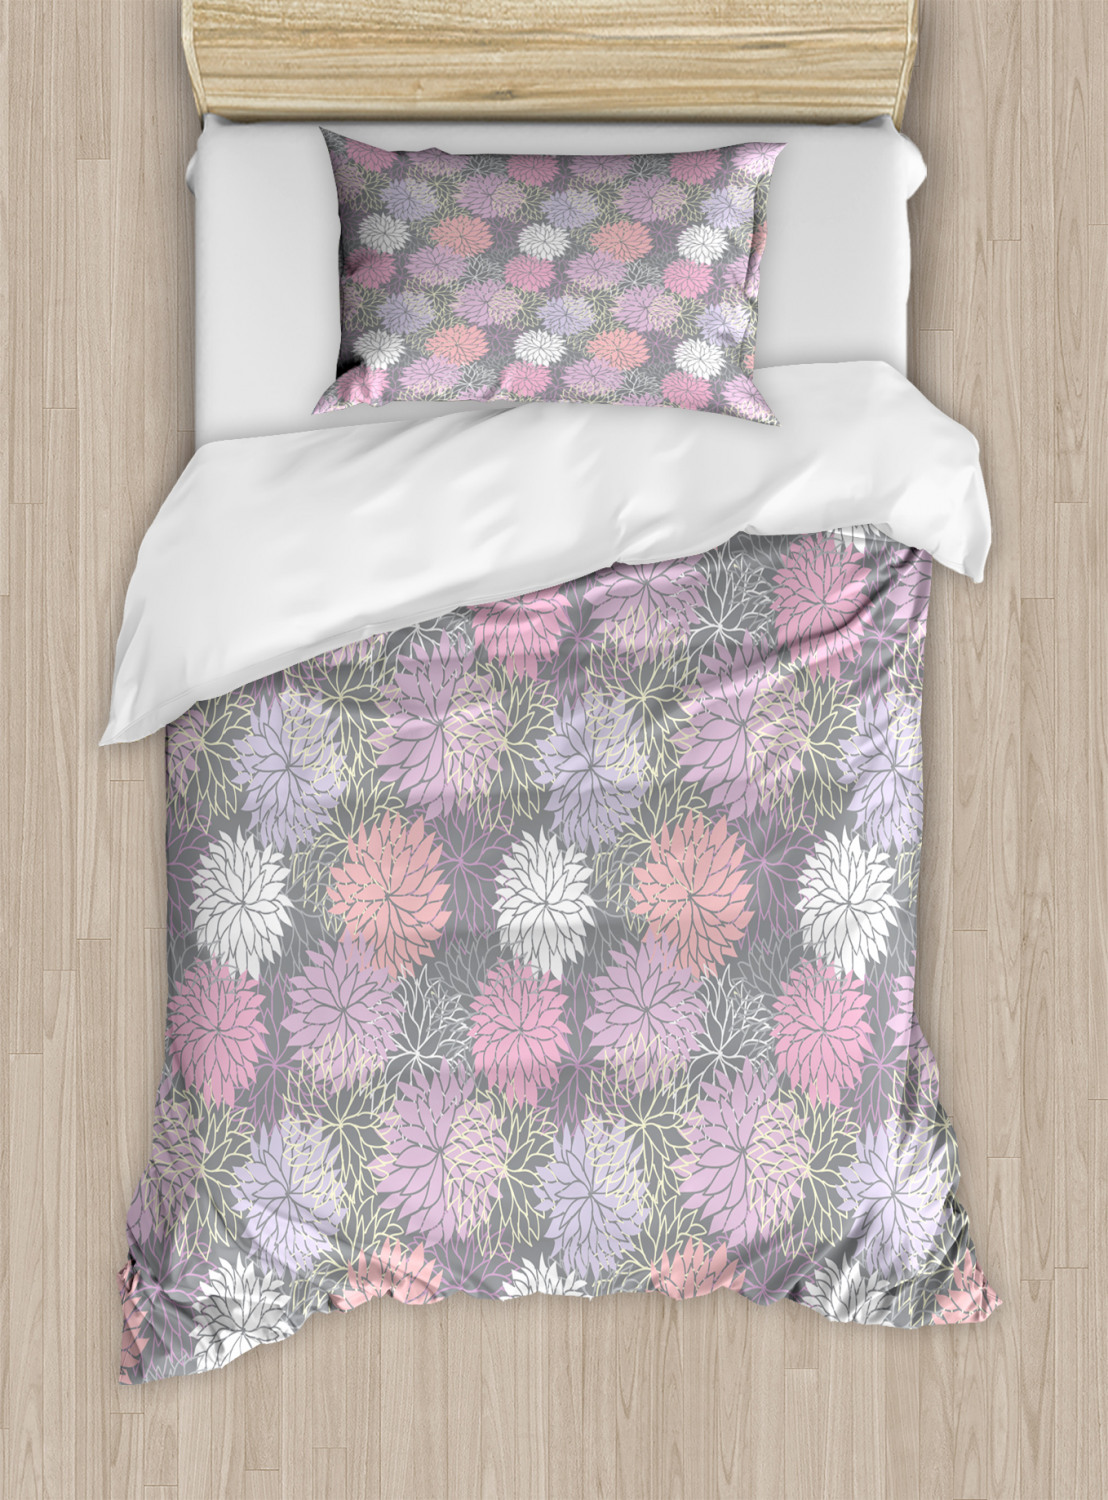 Pink and Grey Duvet Cover Set Twin Queen King Sizes with Pillow Shams